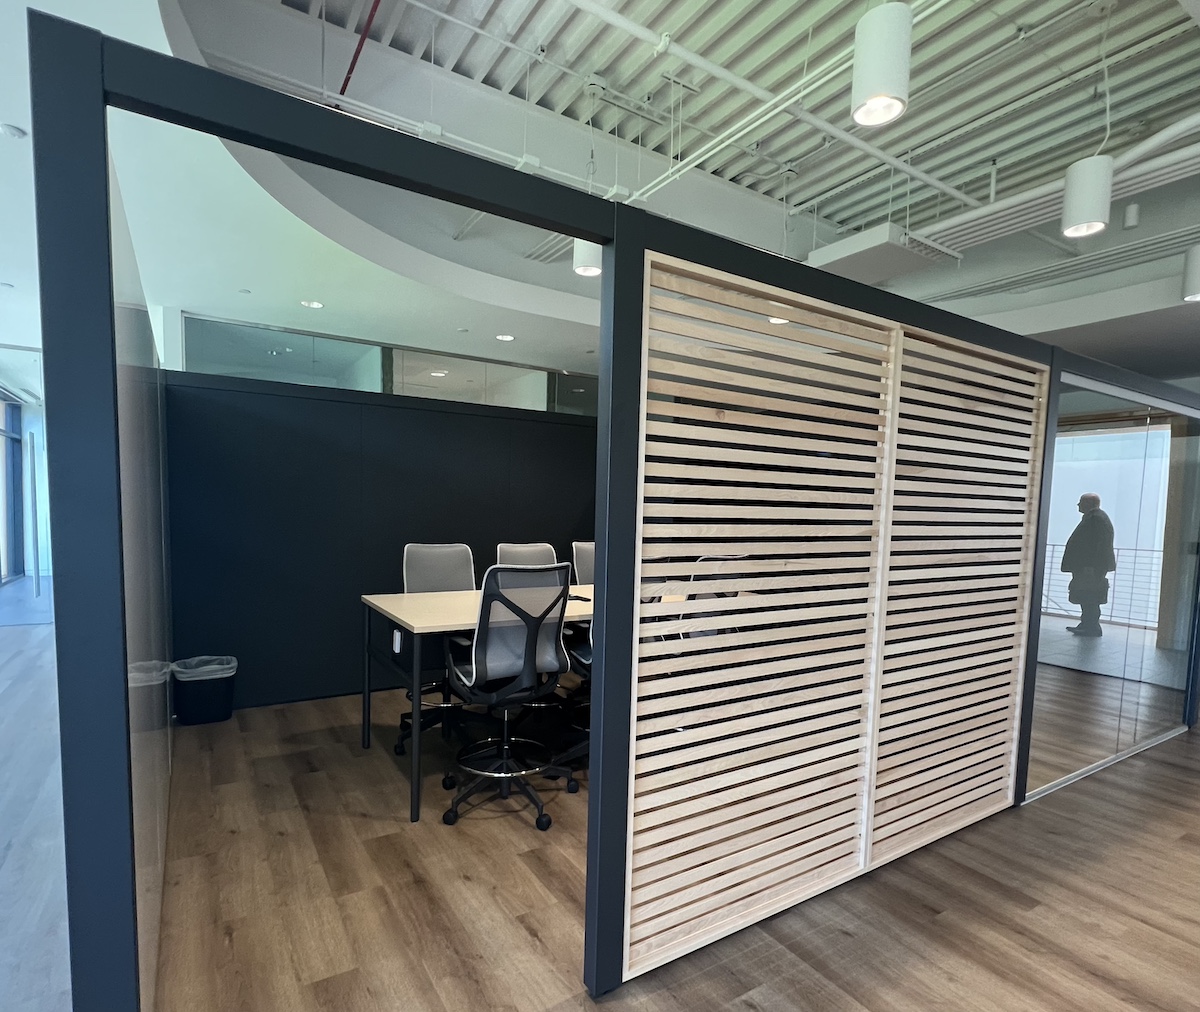 A Semi-Private Feeling Is Created For This Meeting Room With An Open Top And A Louvered Wall